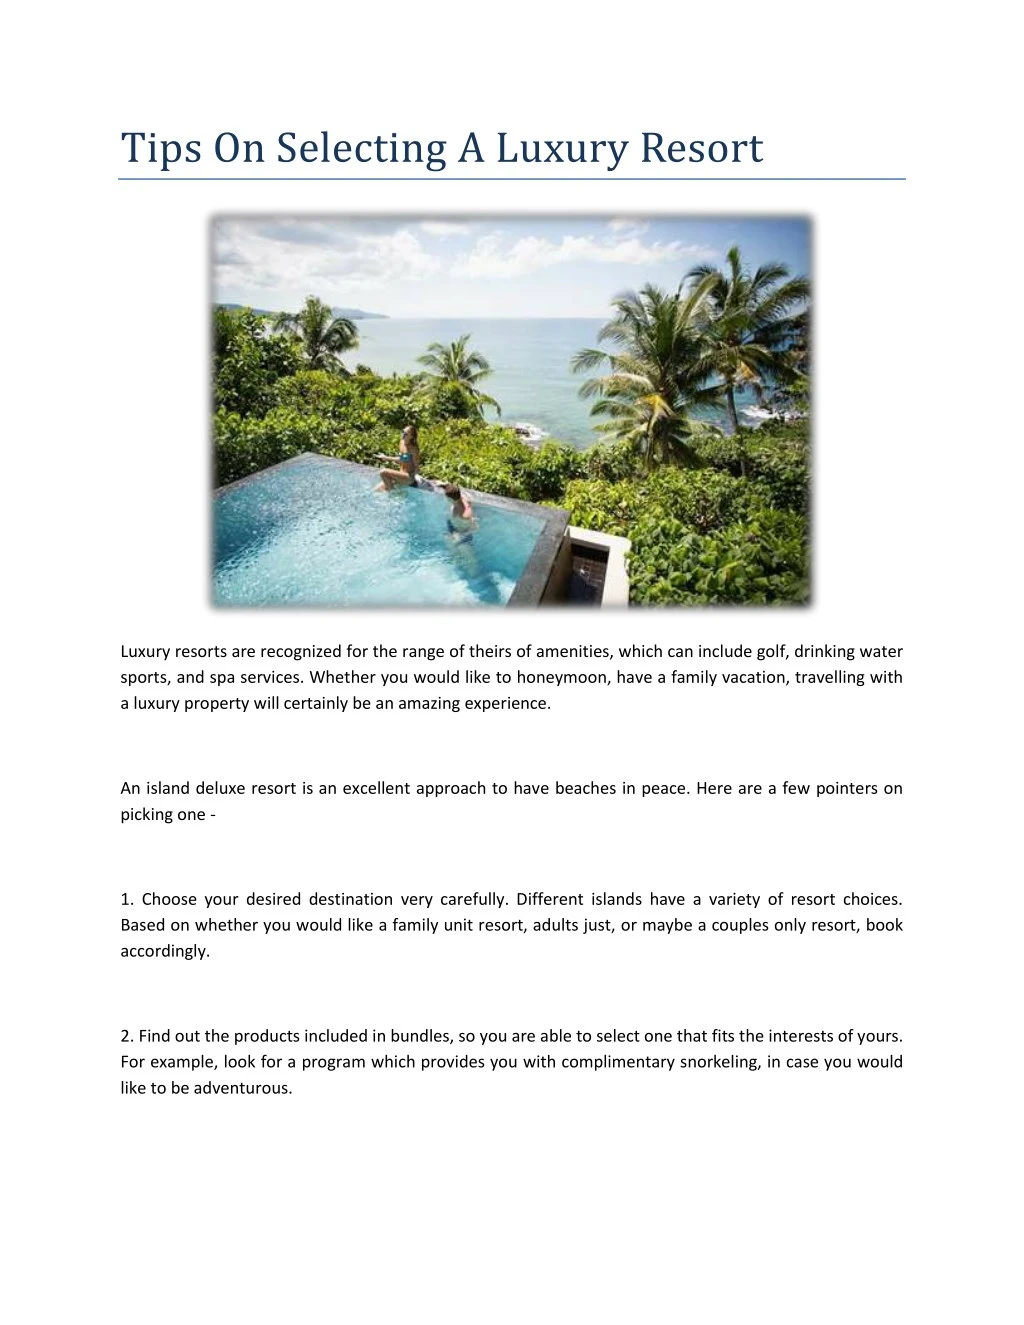 tips on selecting a luxury resort